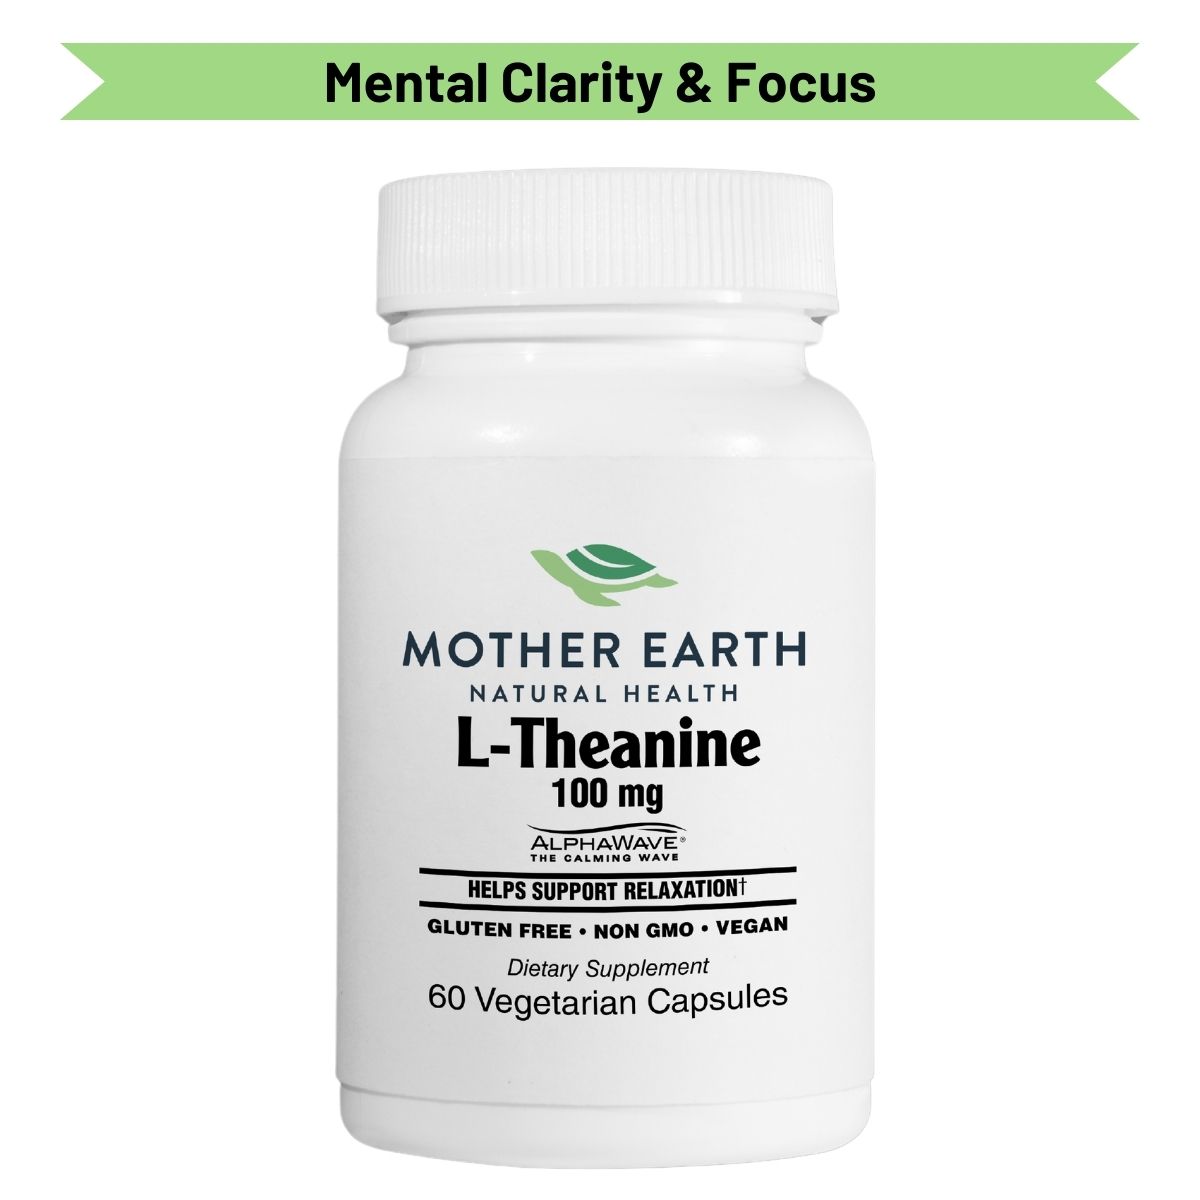 Mother Earth L-Theanine